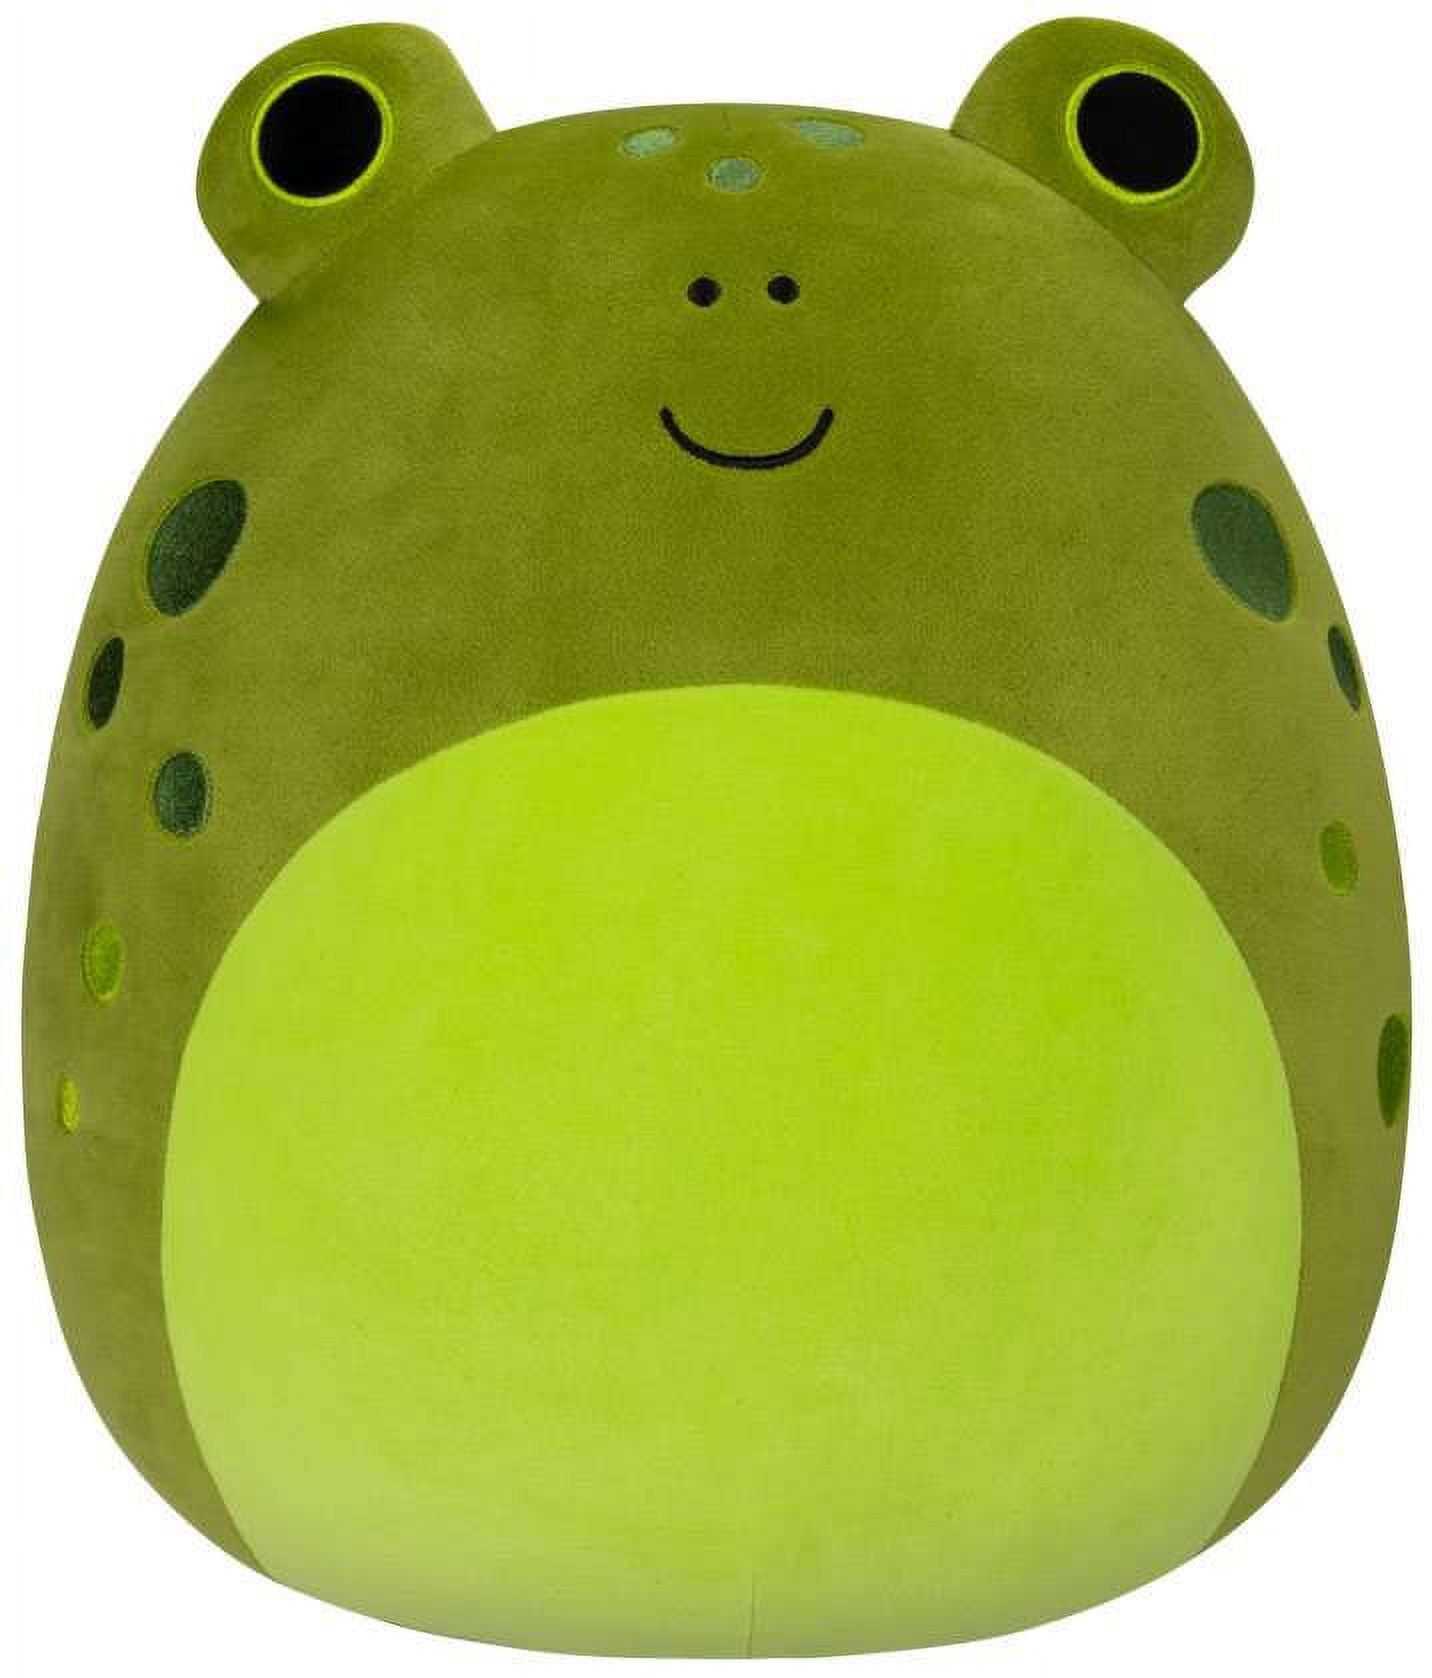 Squishmallows Select Series Vig the Frog Plush